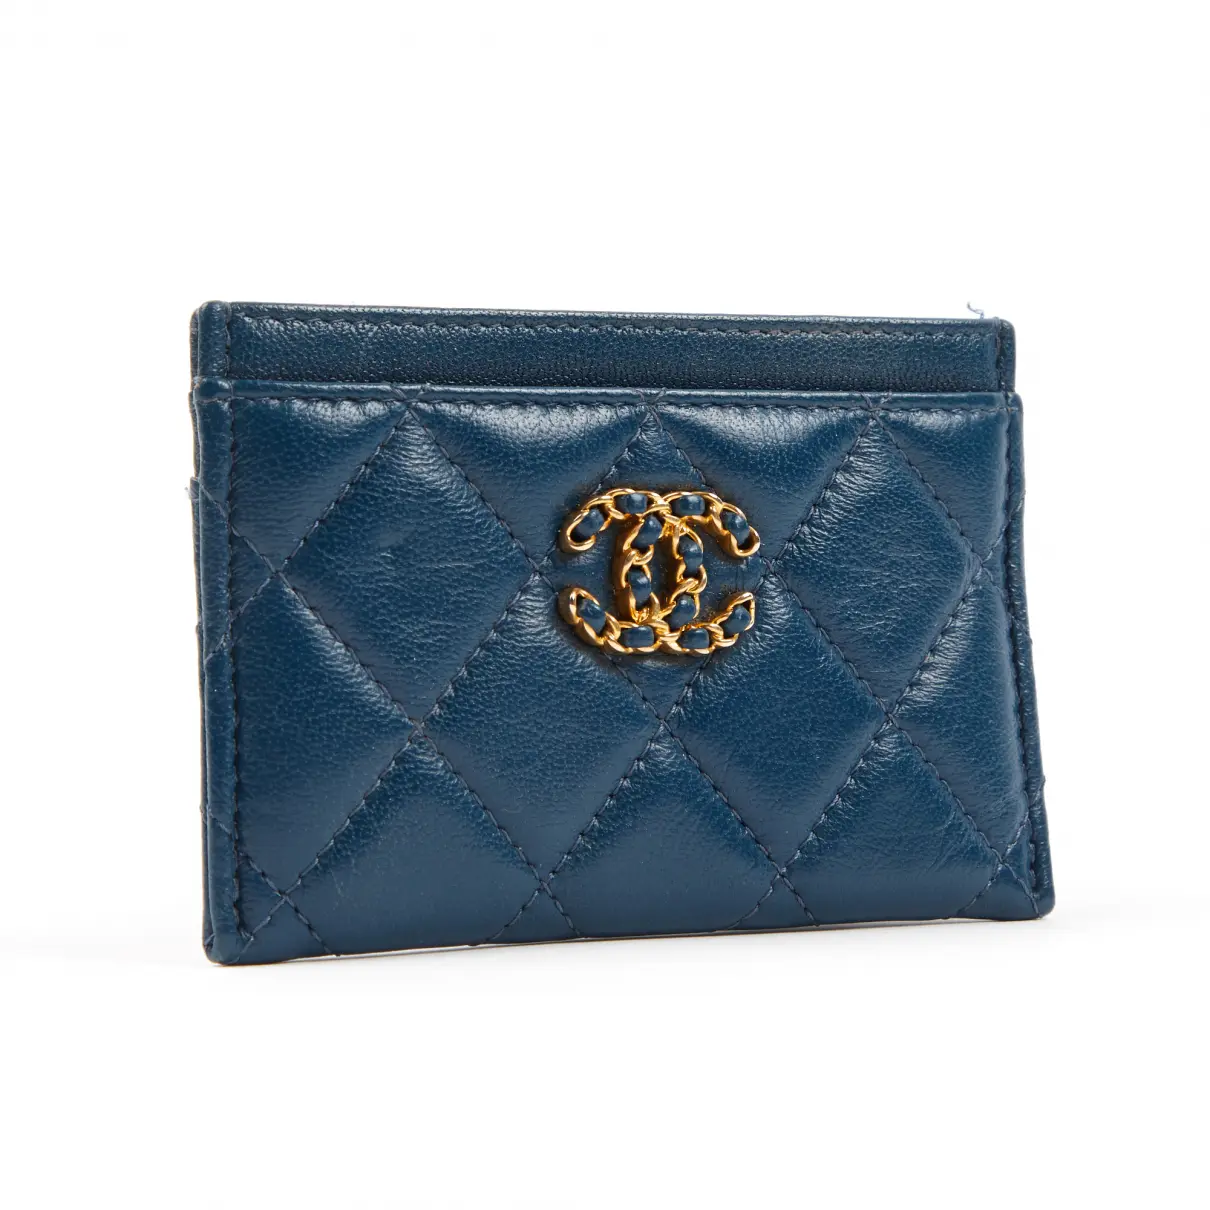 Buy Chanel Leather card wallet online